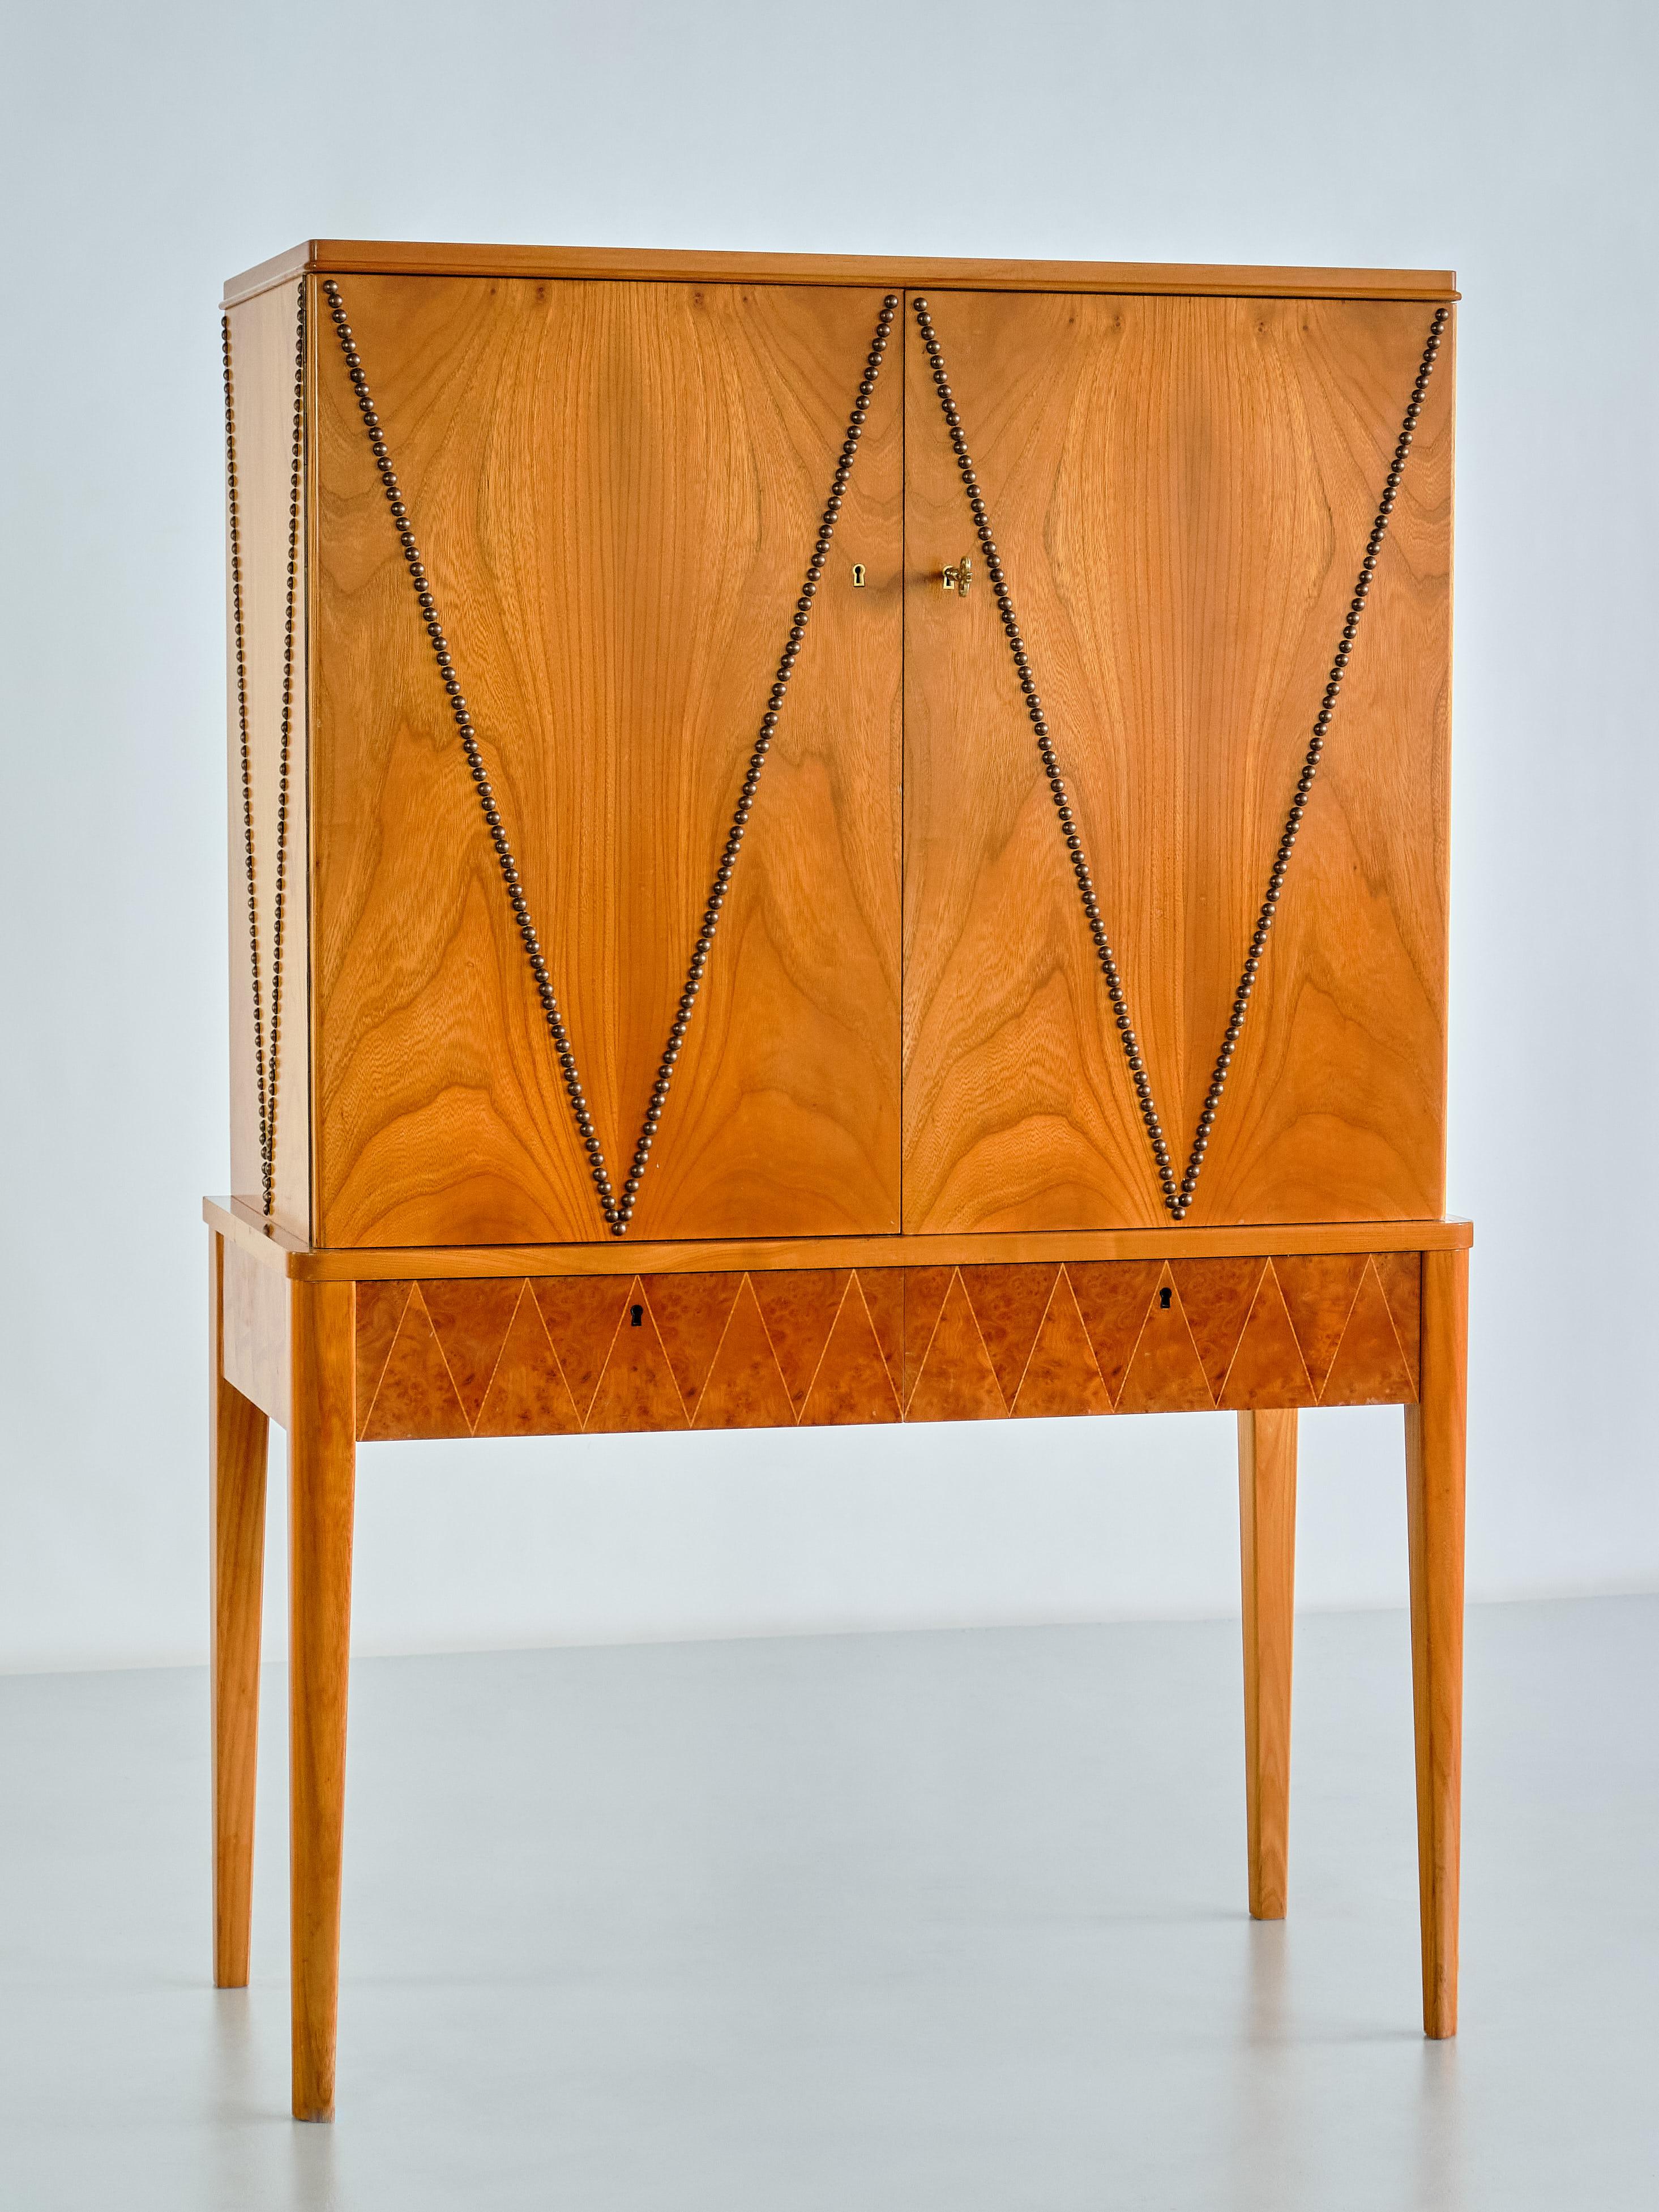 Scandinavian Modern Carl-Axel Acking Attributed Cabinet in Elm, Oak and Brass, SMF Bodafors, 1940s For Sale